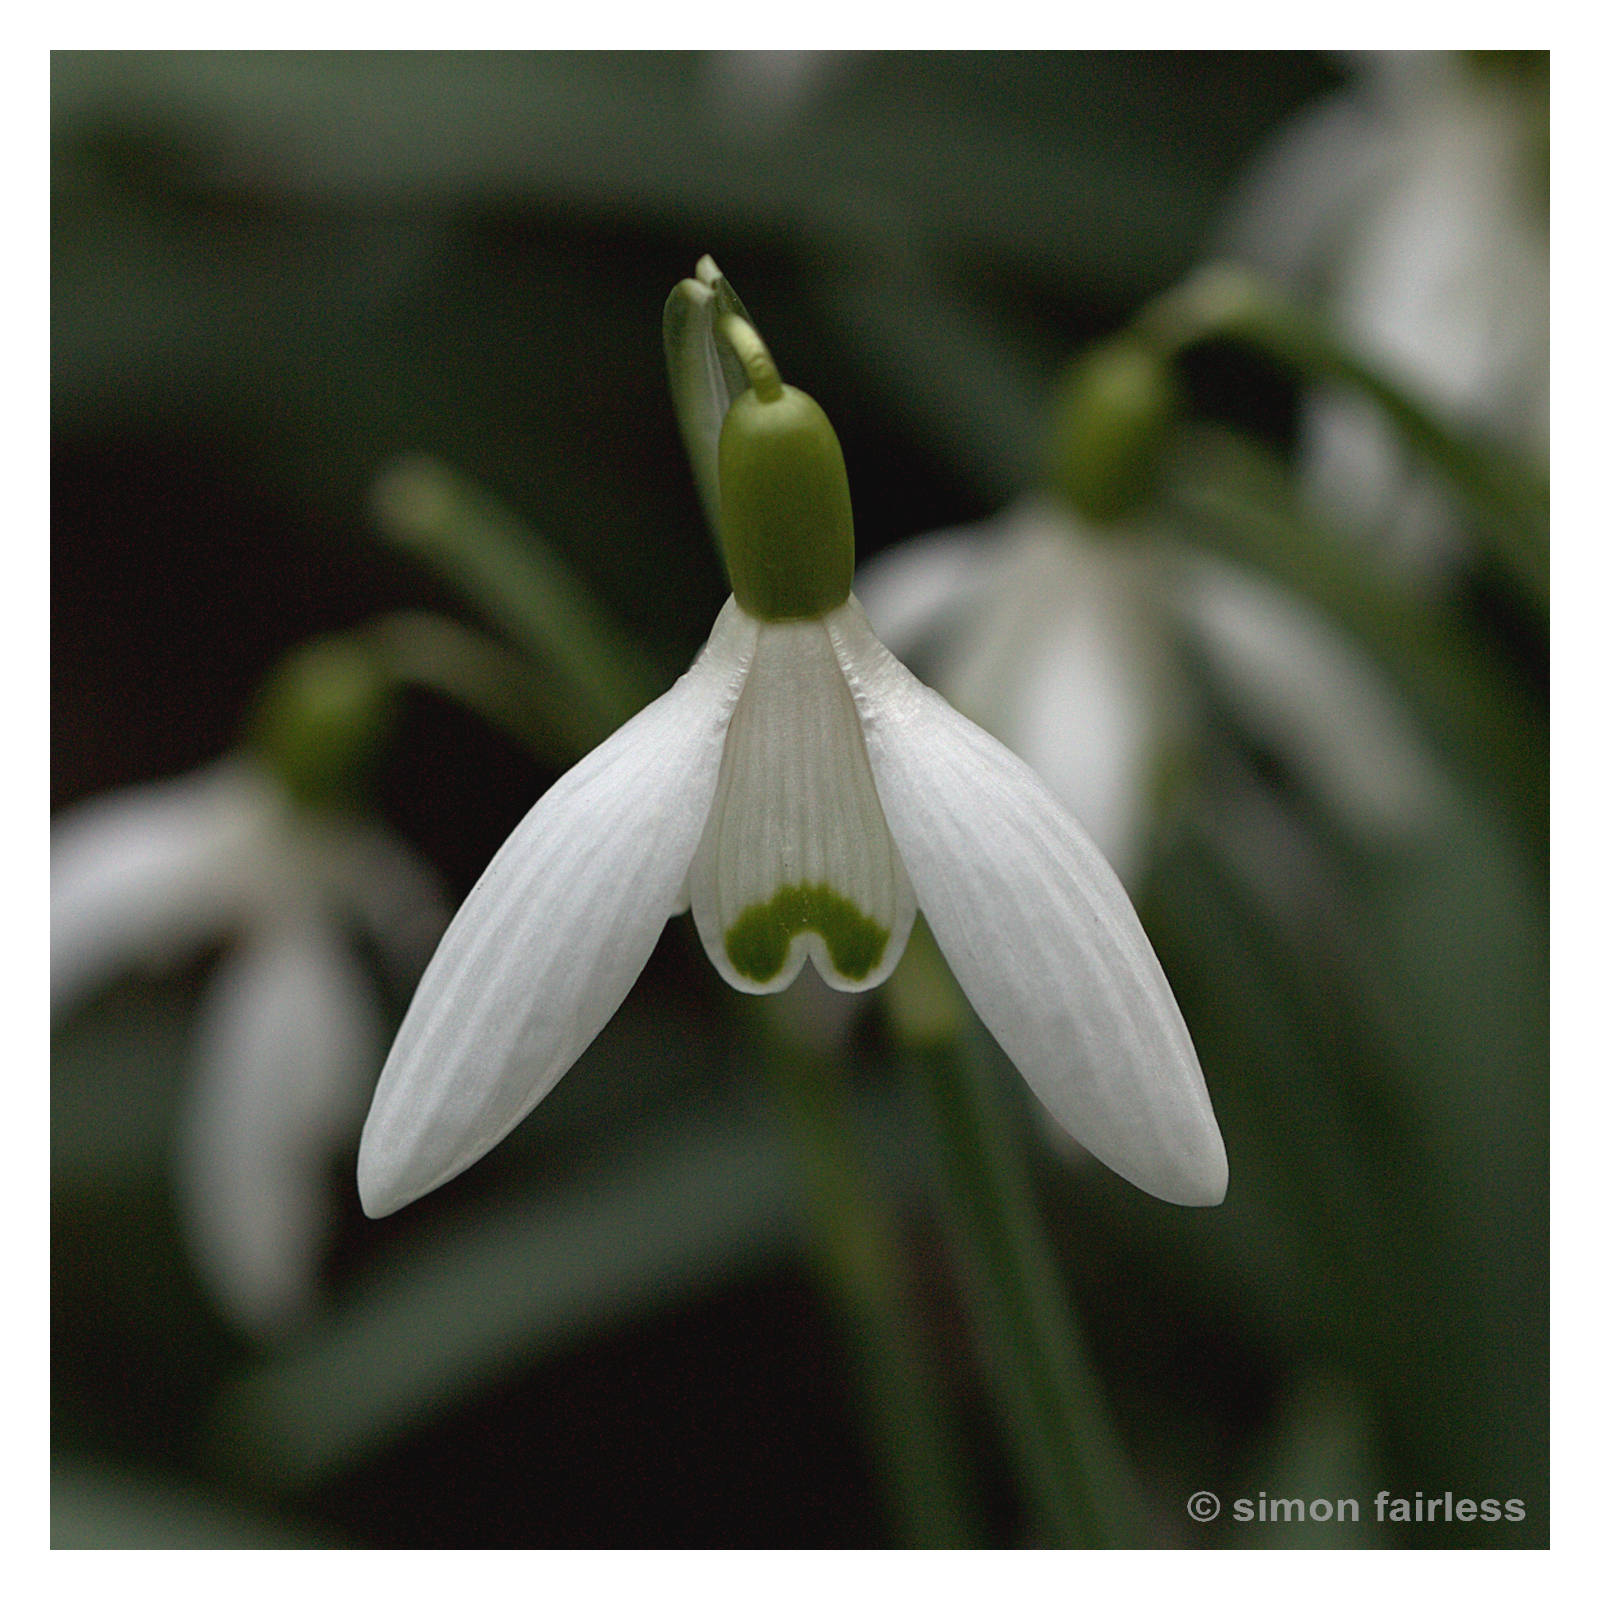 Floral Image of snowdrops